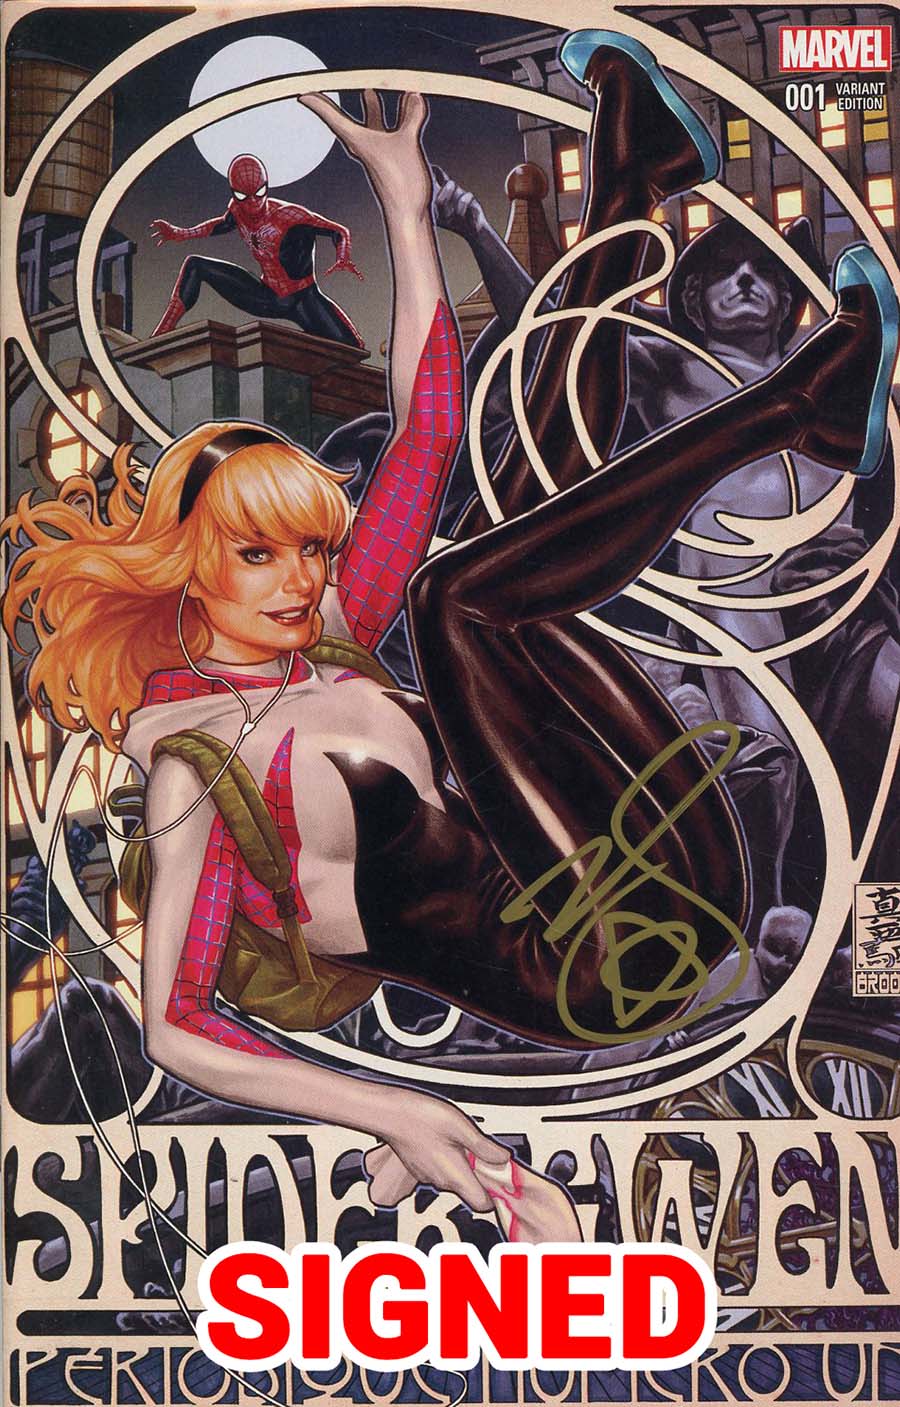 Spider-Gwen Vol 2 #1 Cover Q DF Mark Brooks Art Color Variant Cover Signed By Mark Brooks